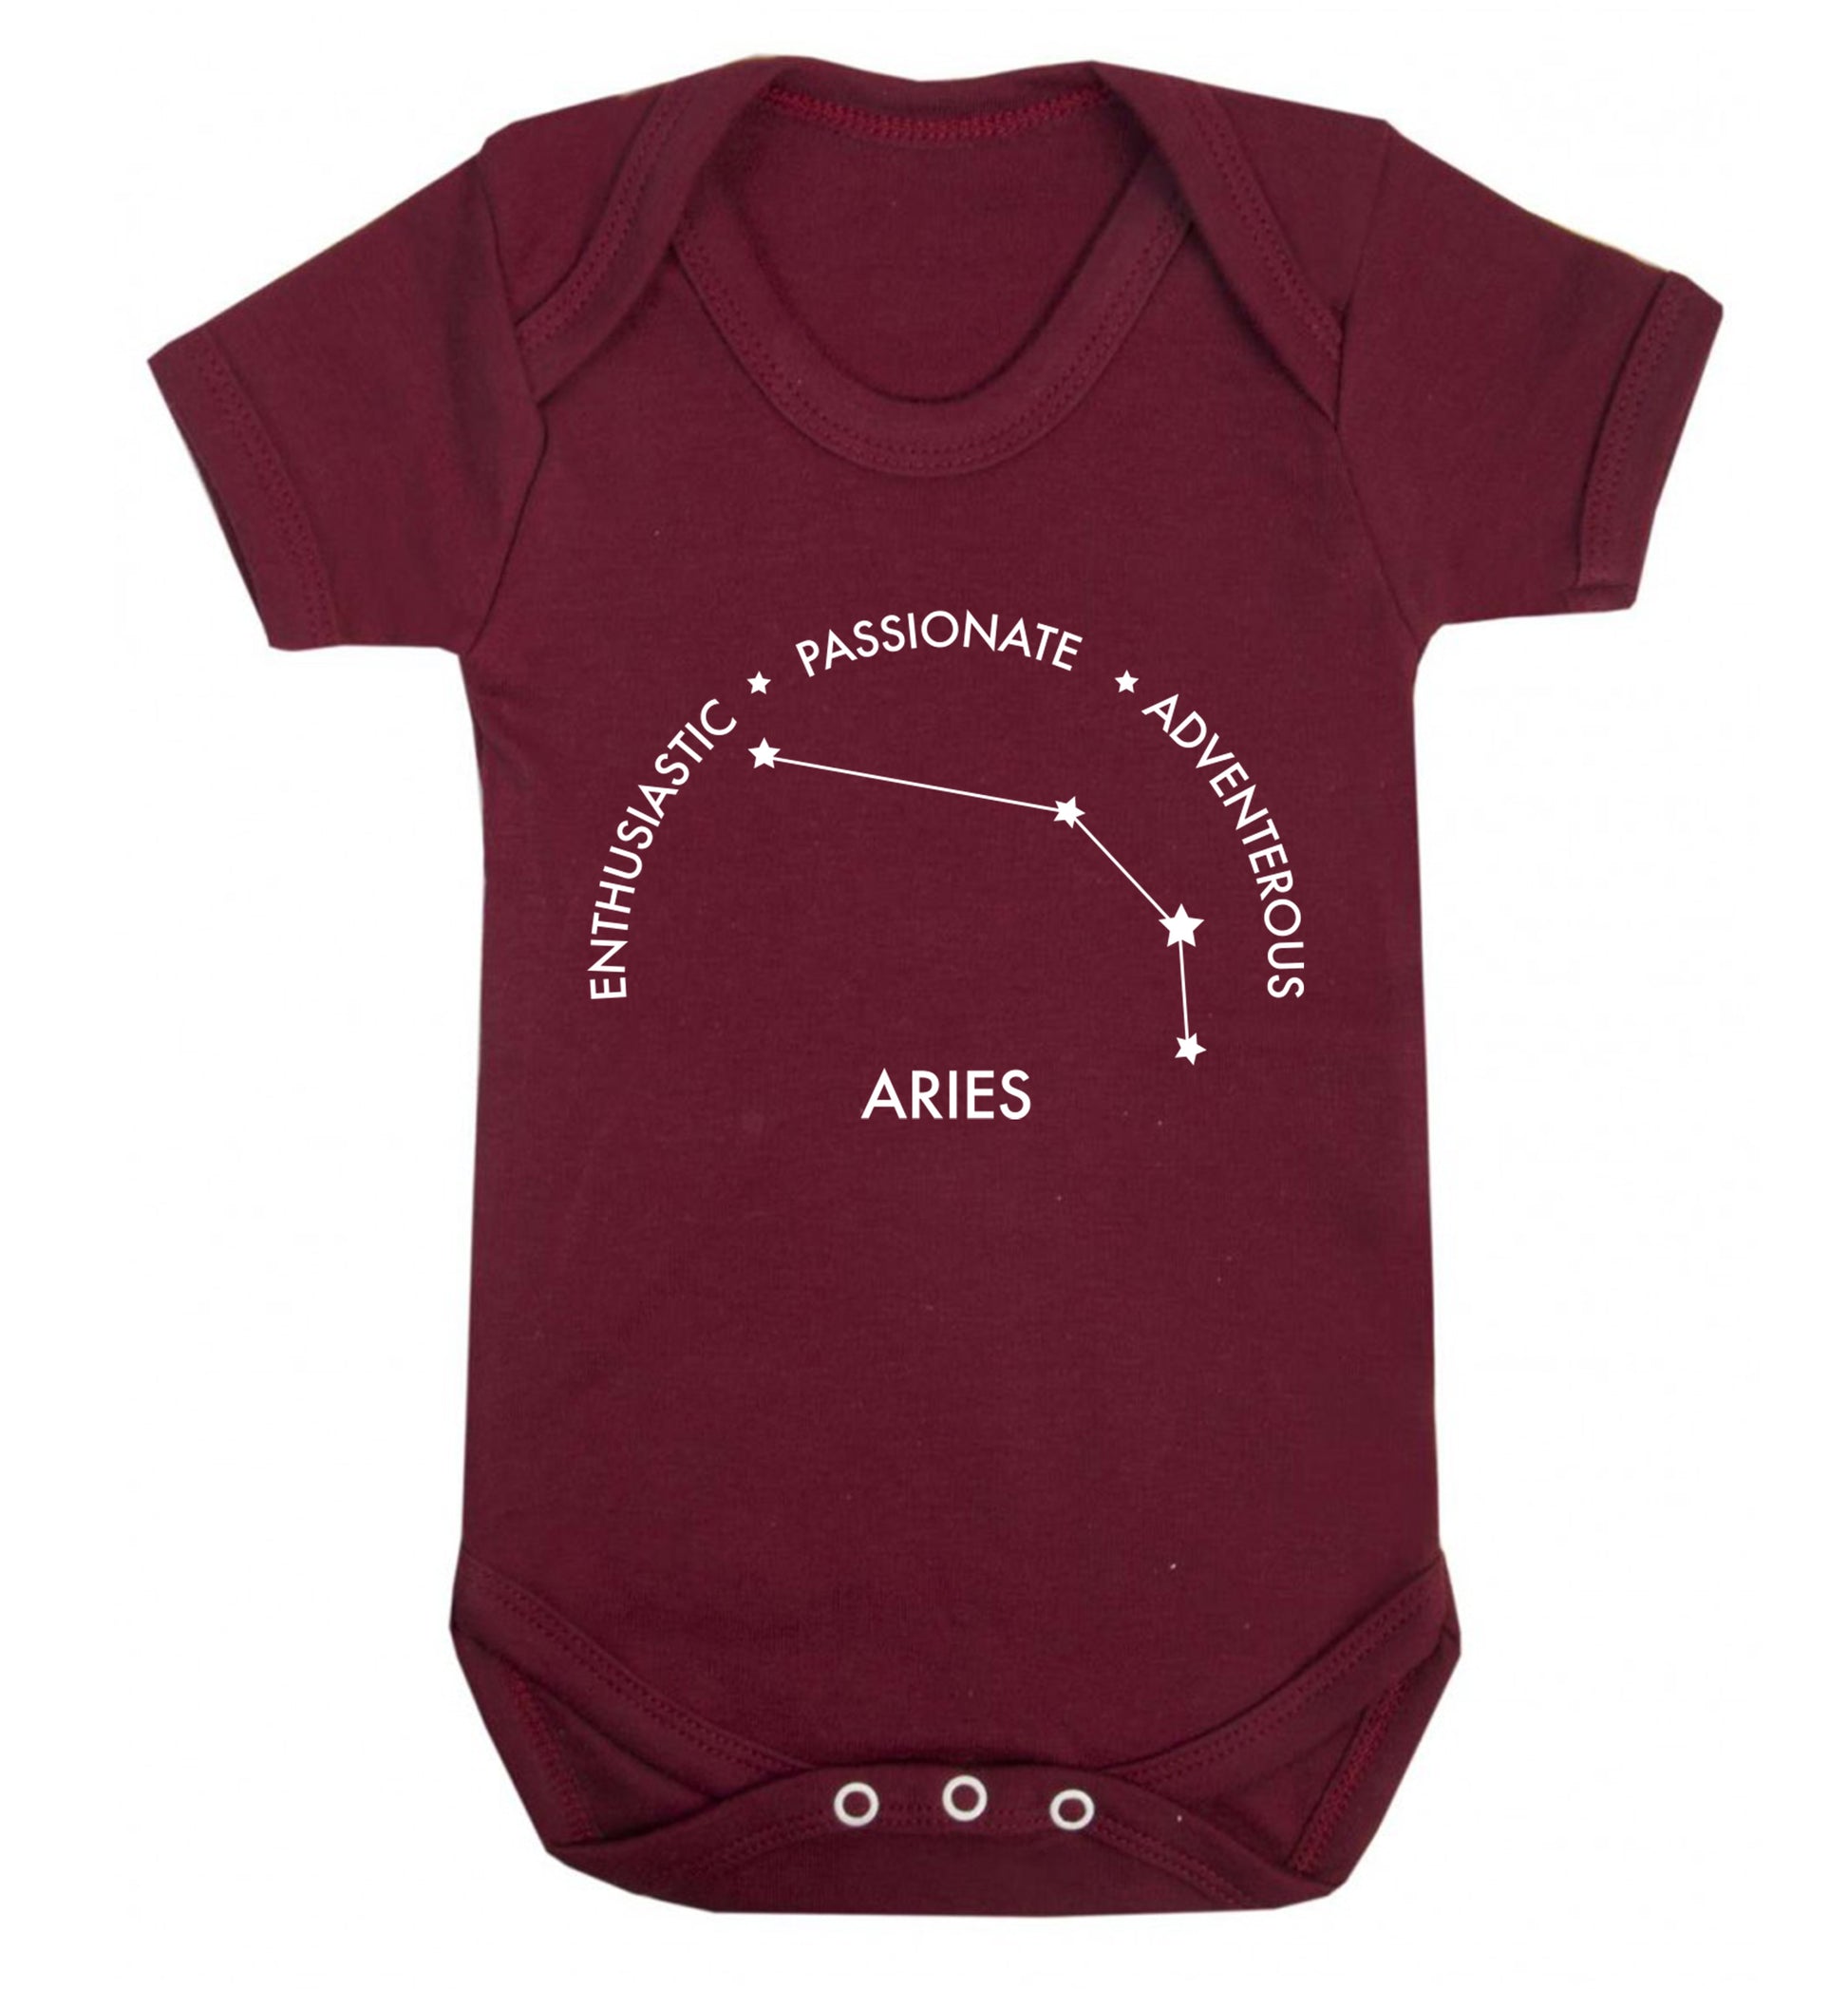 Aries enthusiastic | passionate | adventerous Baby Vest maroon 18-24 months